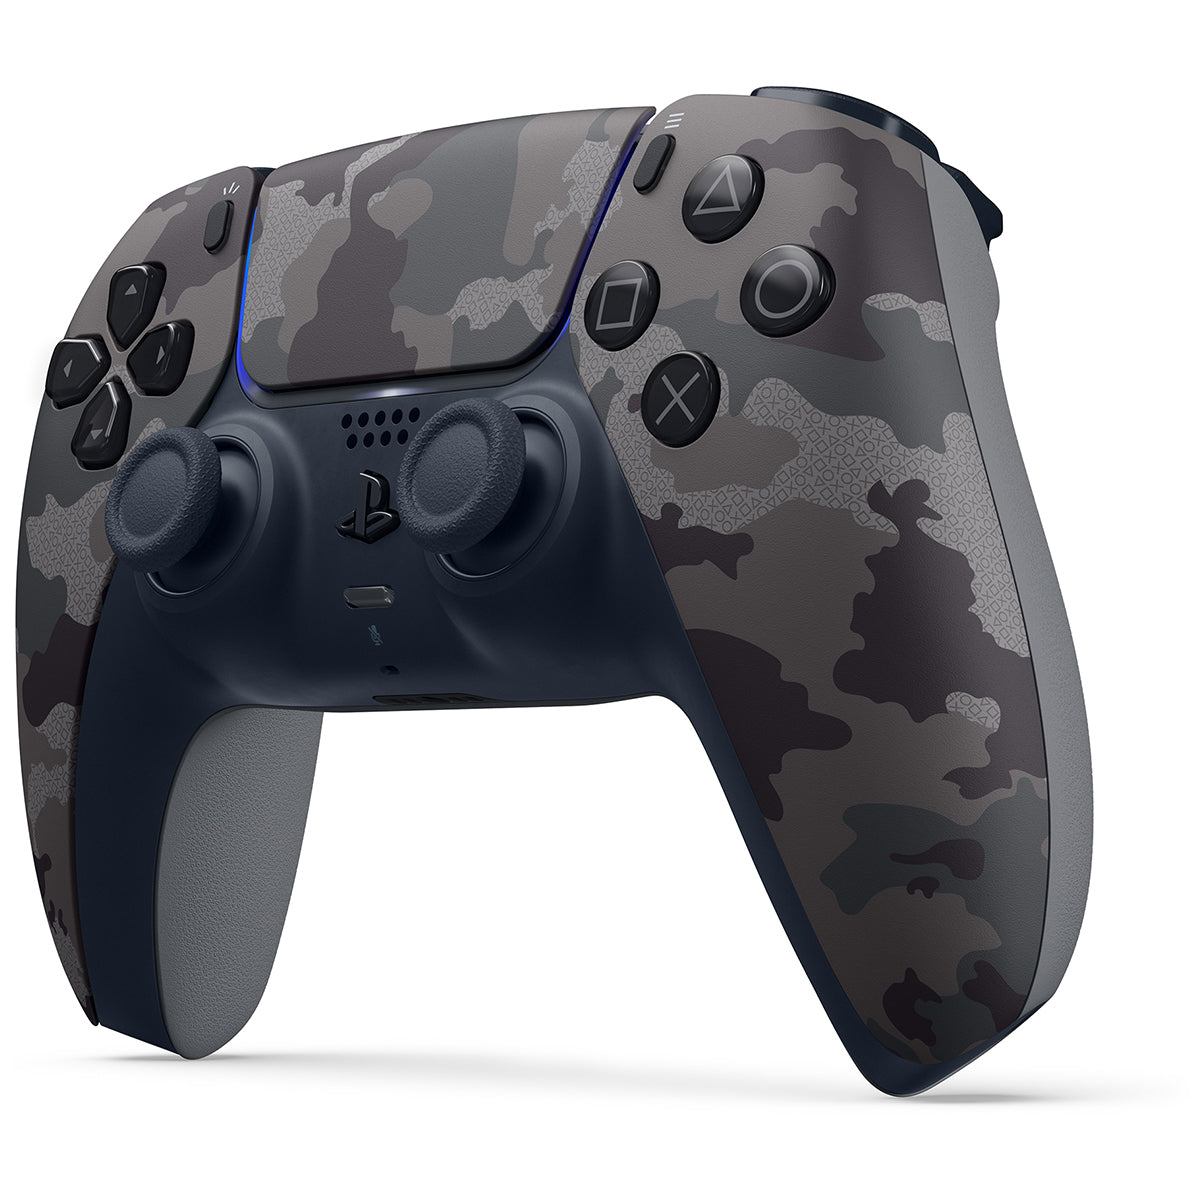 Sony Playstation 5 Disc Edition with Extra Gray Camo Controller and Play and Charge Kit Bundle - Pro-Distributing